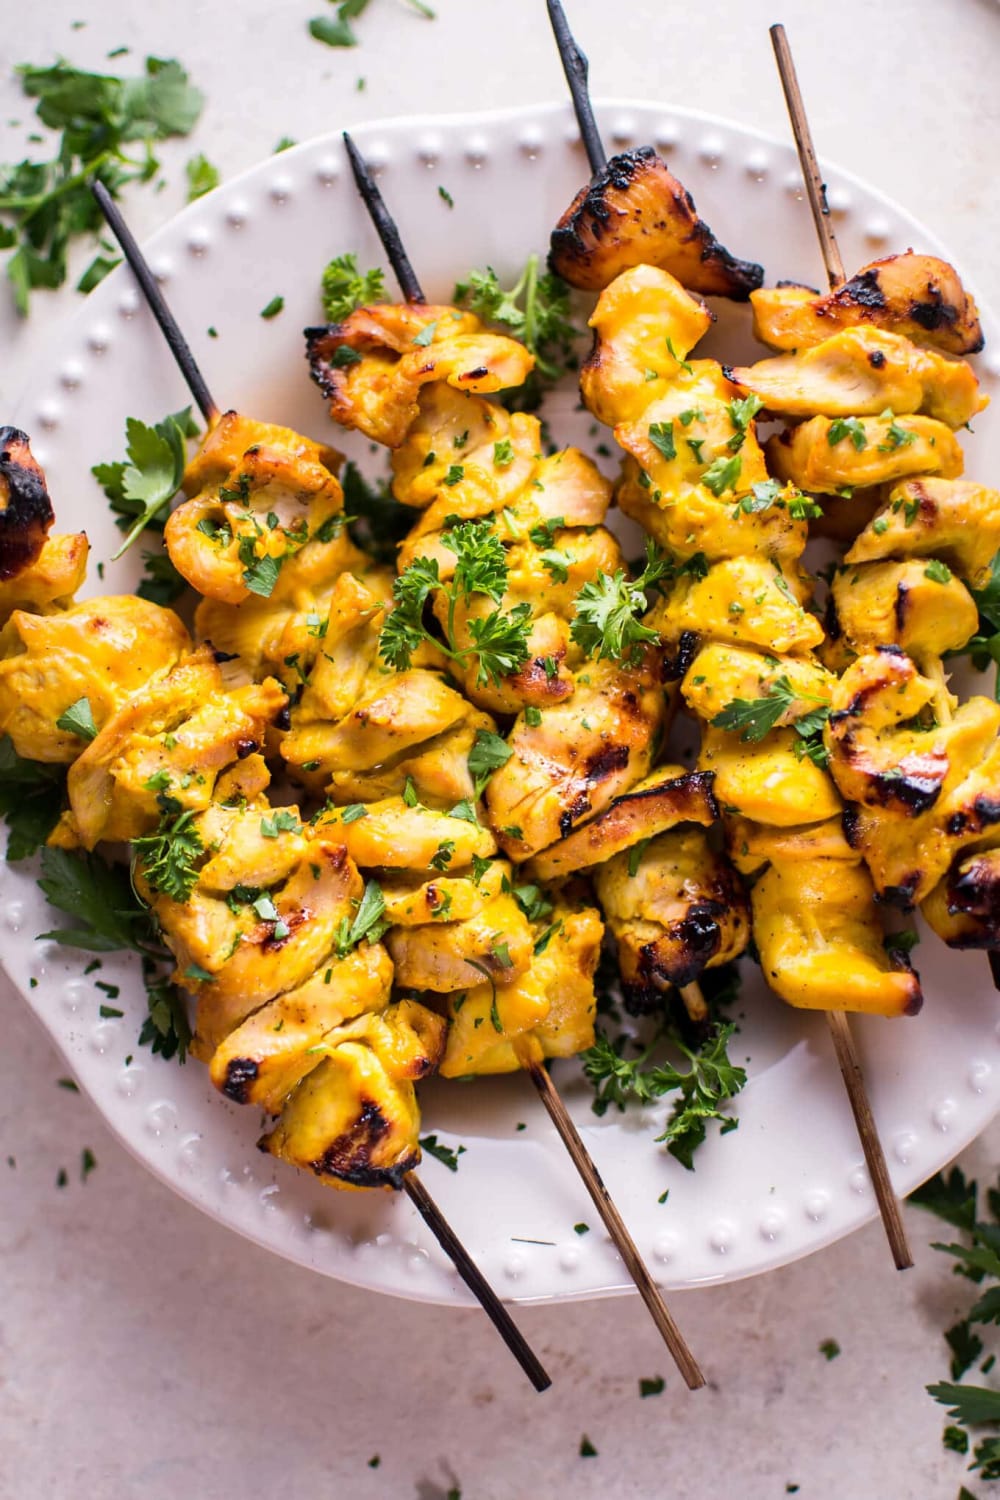 17 Scrumptious Grilled Chicken Recipes for the Summer